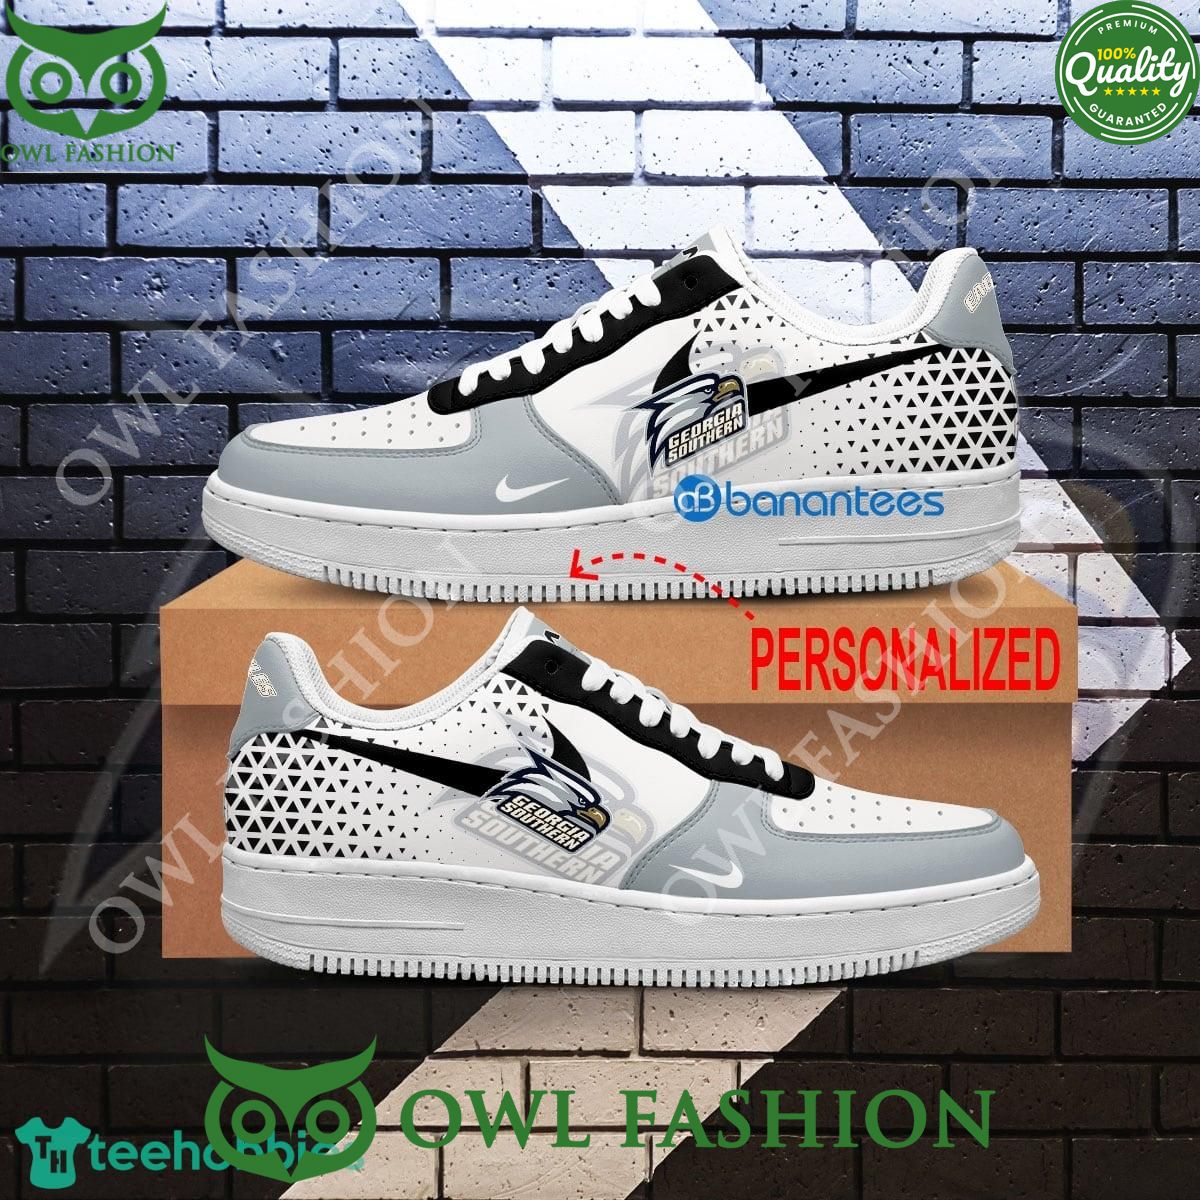 personalized georgia southern eagles ncaa air force 1 shoes aop af1 sneaker 2 zkL9H.jpg